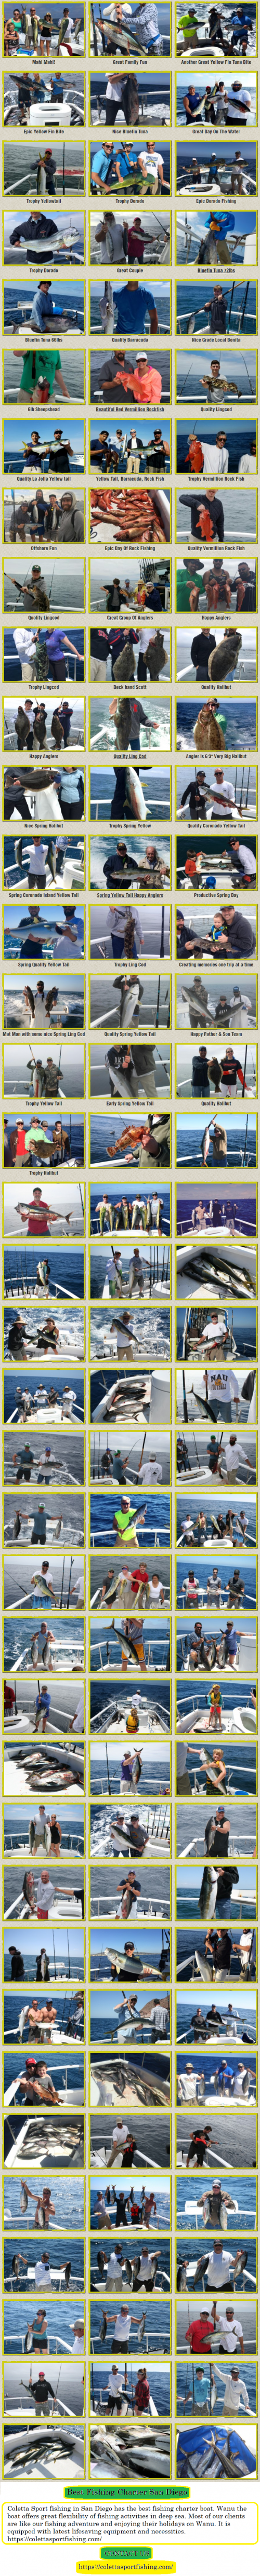 Coletta Sport fishing in San Diego has the best fishing charter boat. Wanu the boat offers great flexibility of fishing activities in deep sea. Most of our clients are like our fishing adventure and enjoying their holidays on Wanu. It is equipped with latest lifesaving equipment and necessities. For more information visit our website, https://colettasportfishing.com/